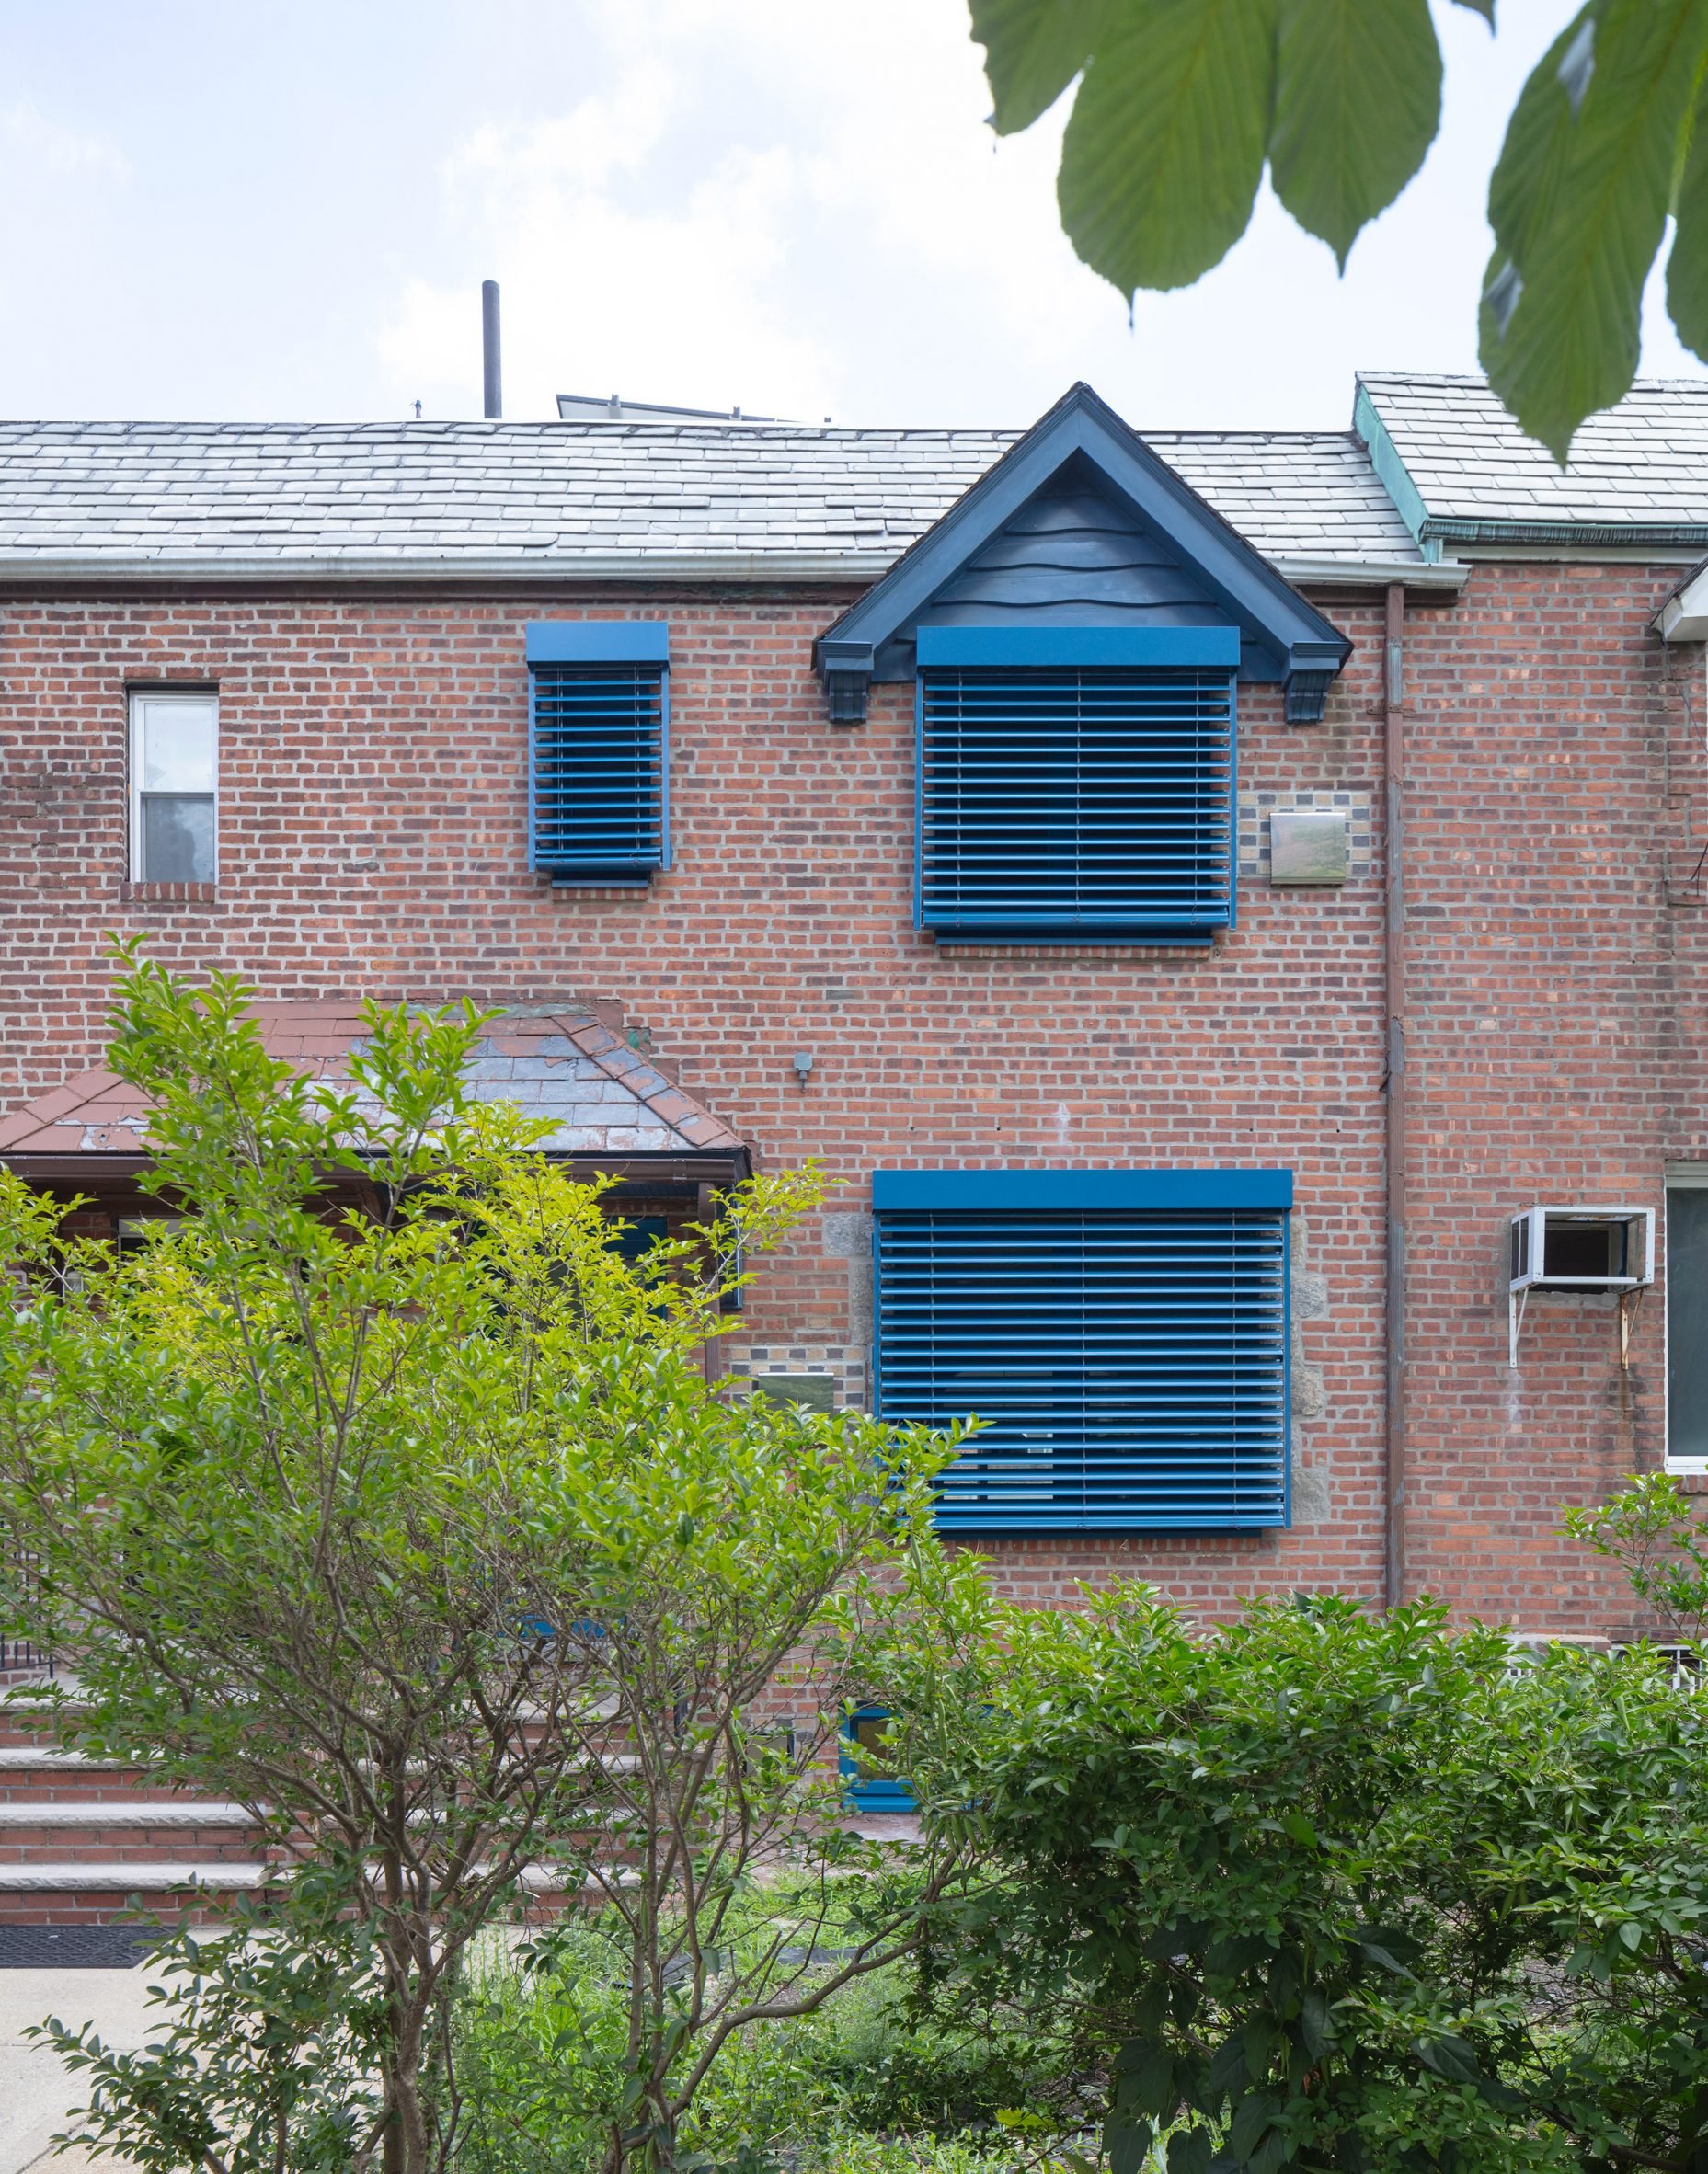 Terraced house with bright blue Venetian blinds over windows